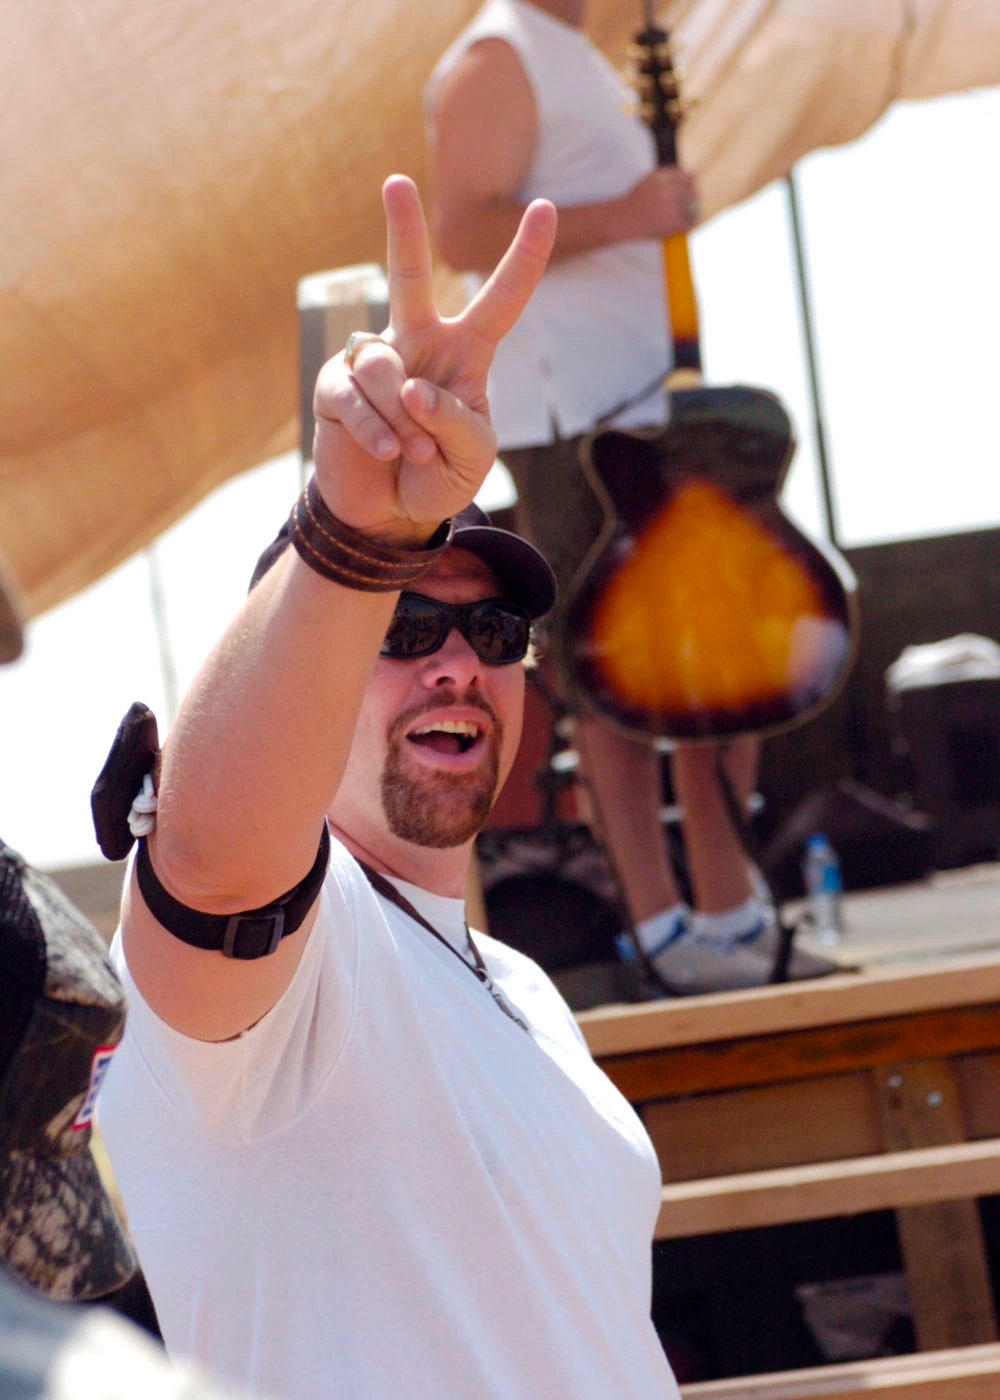 KIRKUK, Iraq (May 28, 2006) -- Country music star, Toby Keith, reacts to the crowd of Soldiers and Airmen at Forward Operating Base Warrior today. Keith spent the Memorial Day holiday traveling across Iraq to entertain service members.